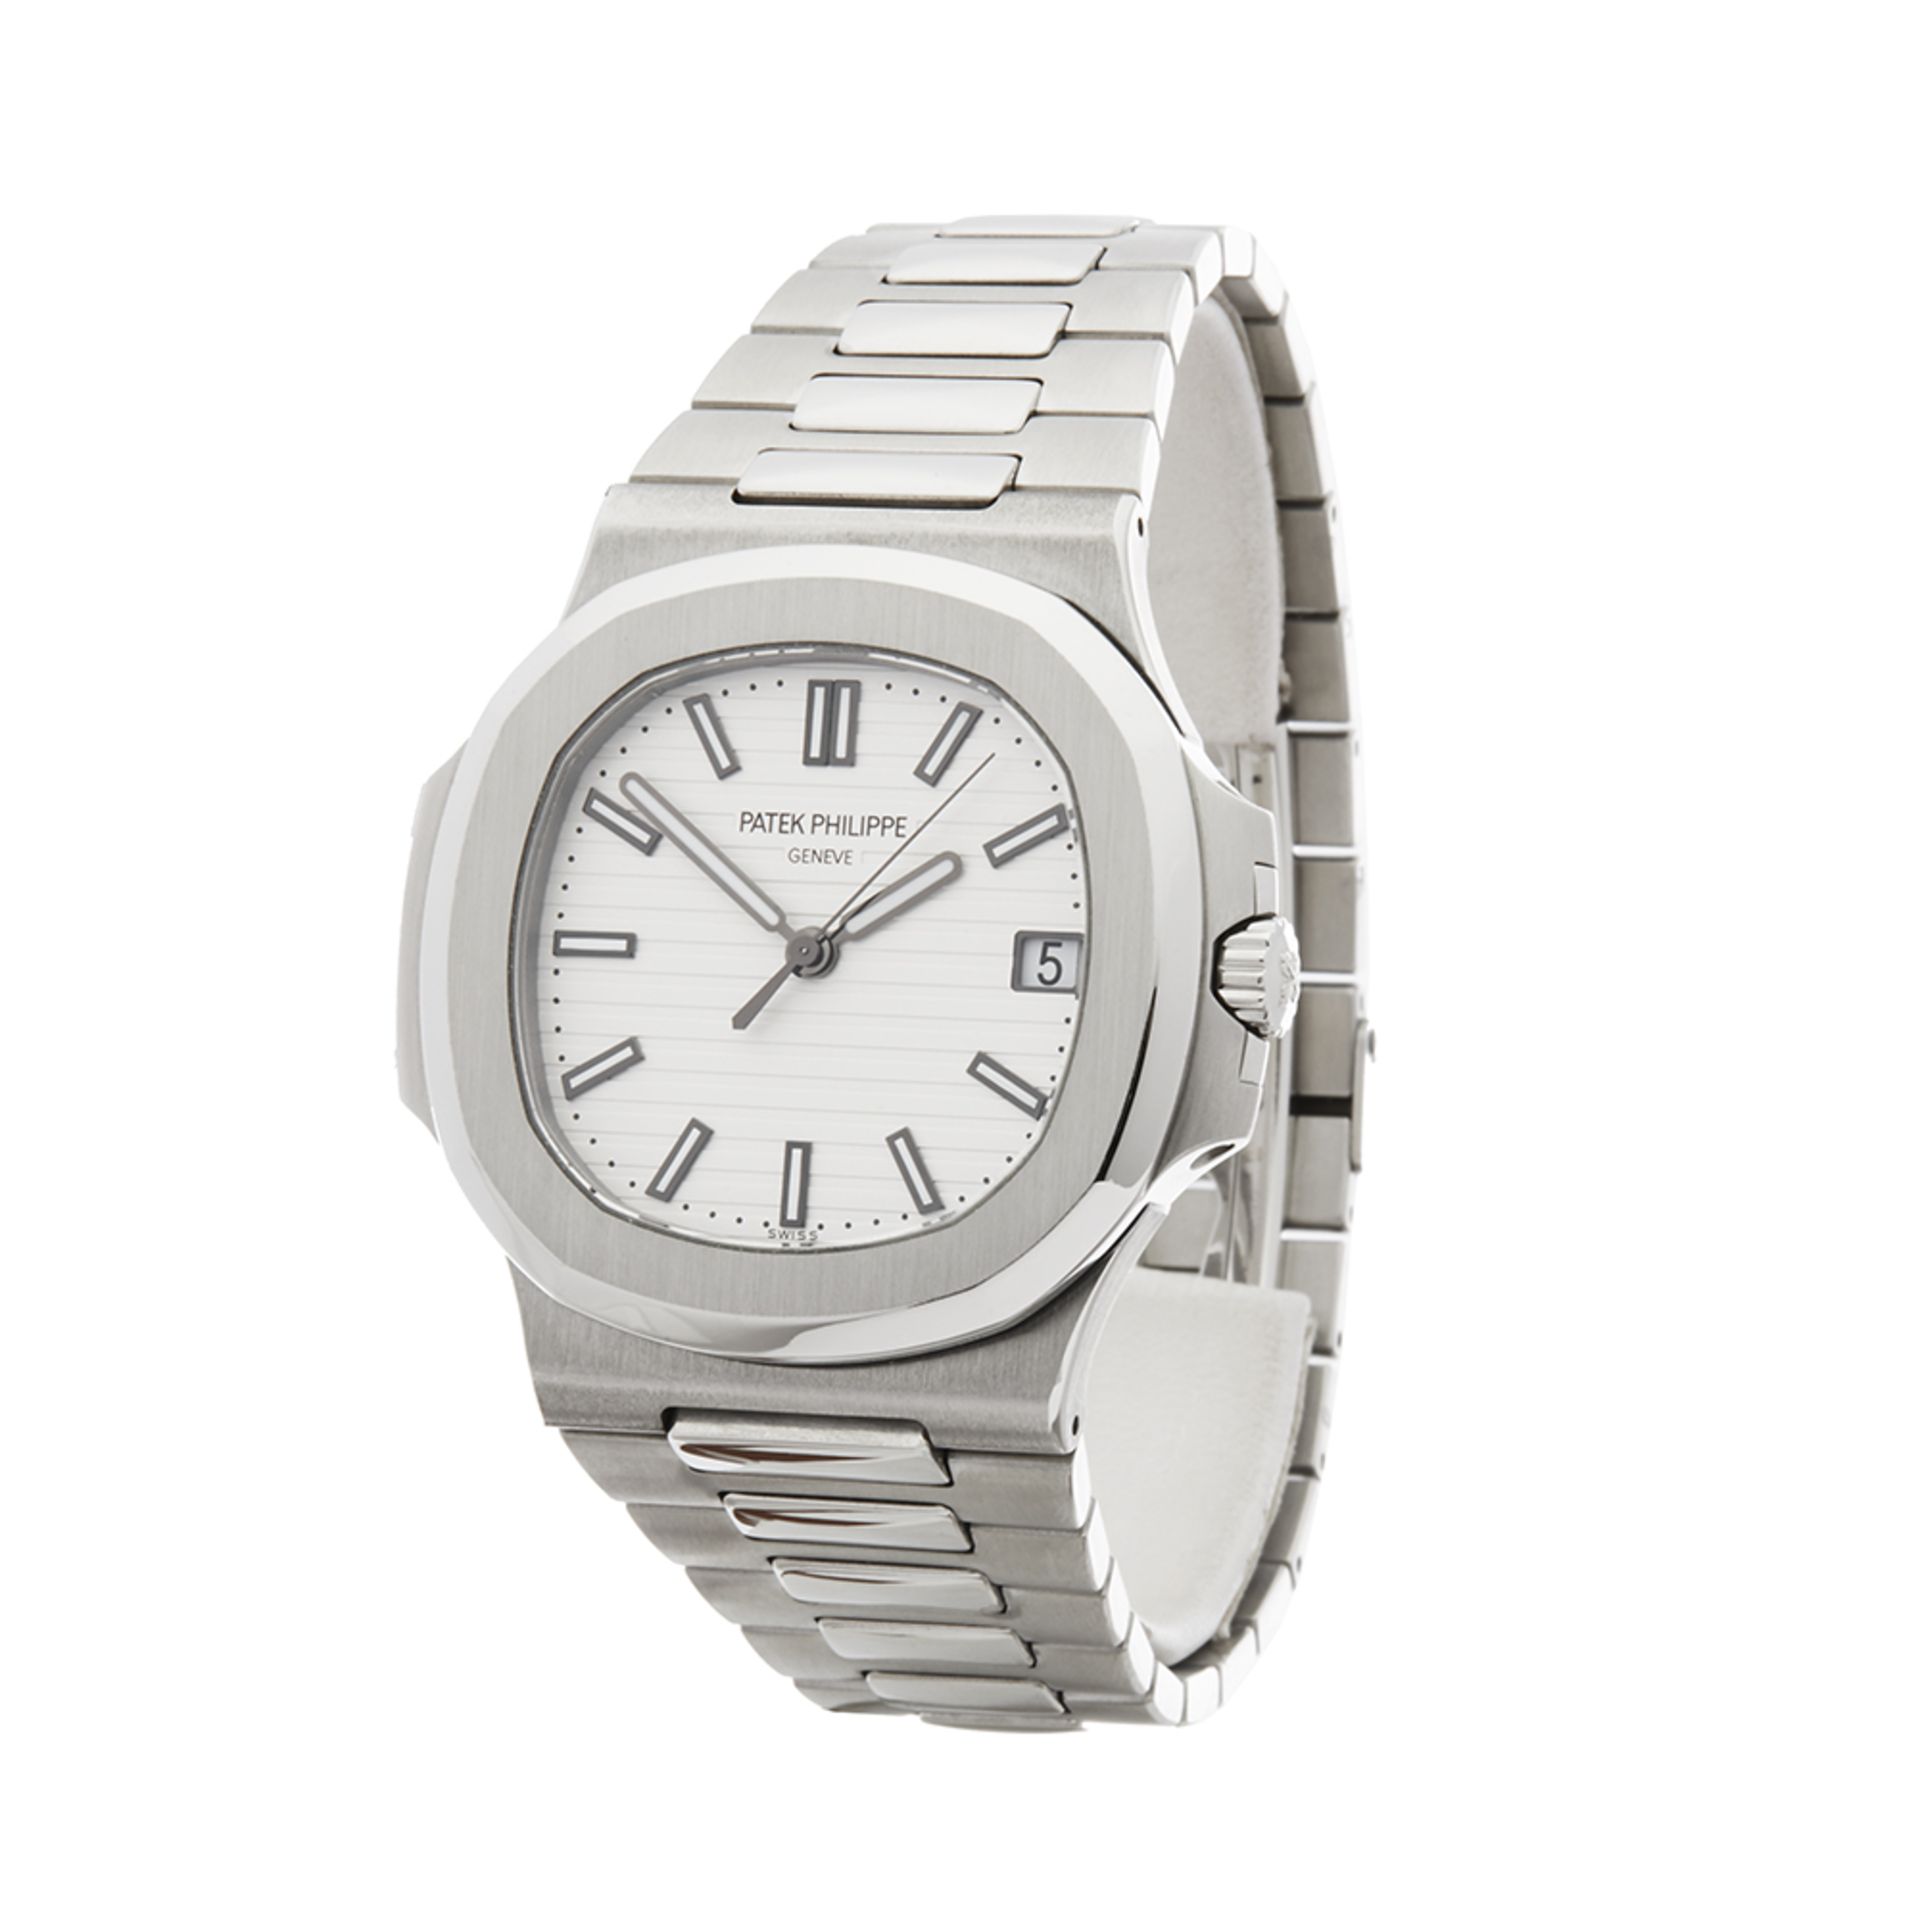 Patek Philippe Nautilus 40mm Stainless Steel - 5711 1A/011 - Image 3 of 8